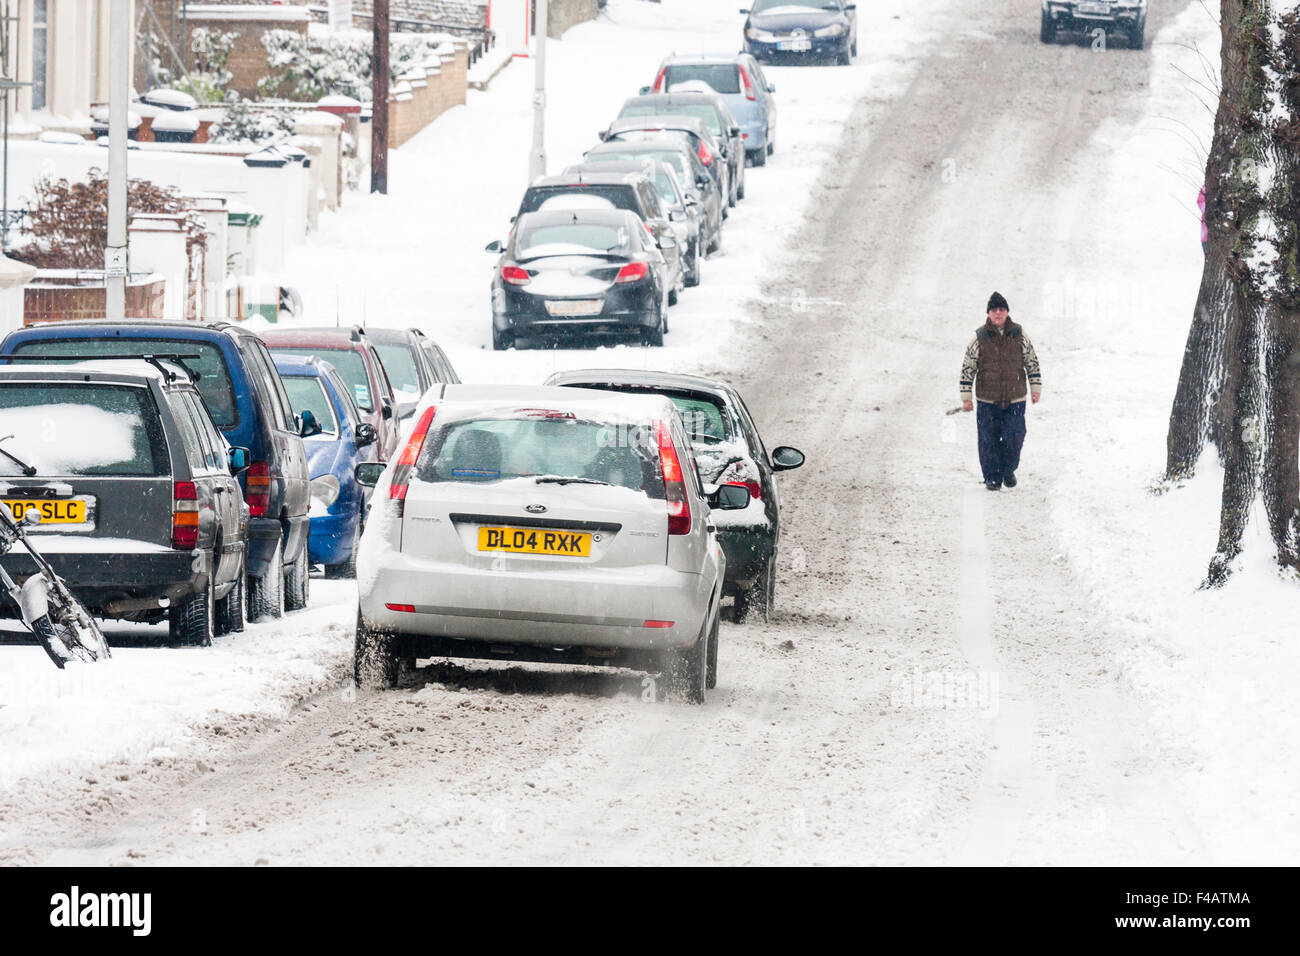 Bad weather, England, Ramsgate town. Snow covered main road with cars parked and cars attempting to drive along in hazadous conditions after snowfall. Stock Photo